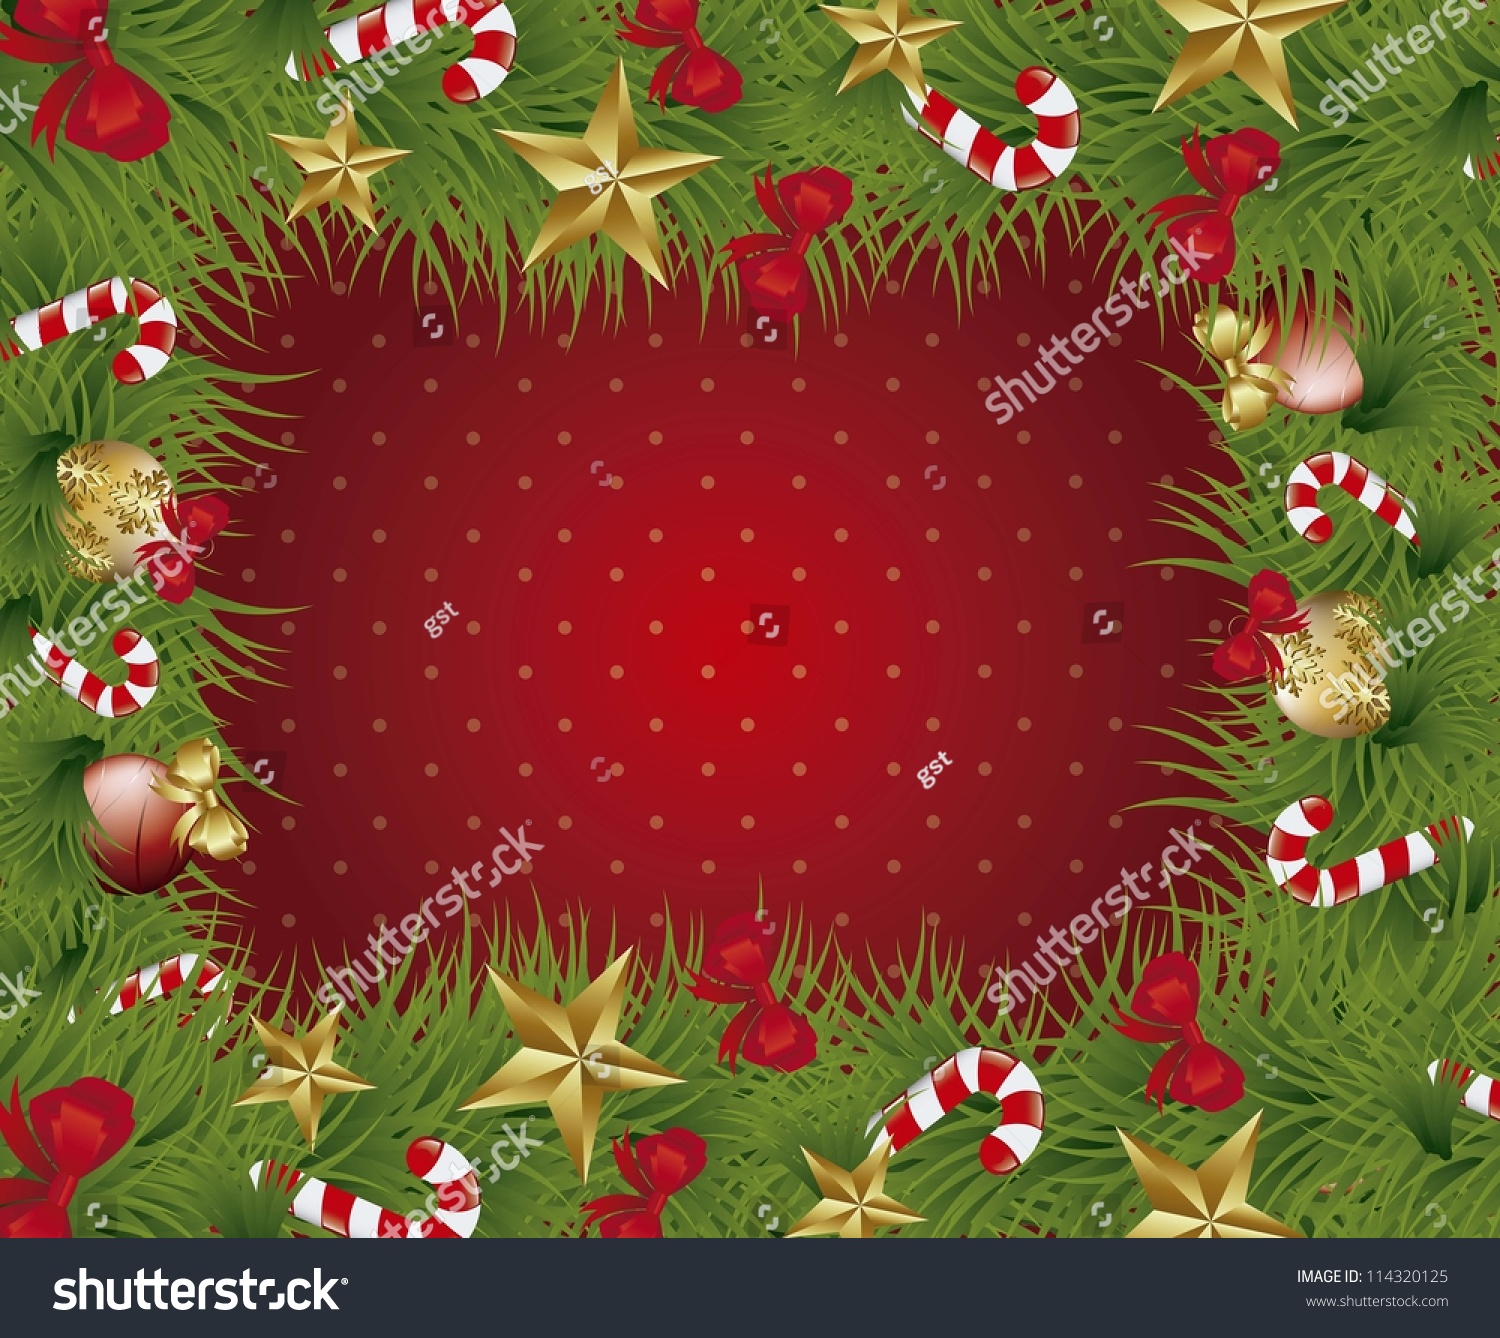 Black Christmas Card With Garland. Vector Illustration - 114320125 ...